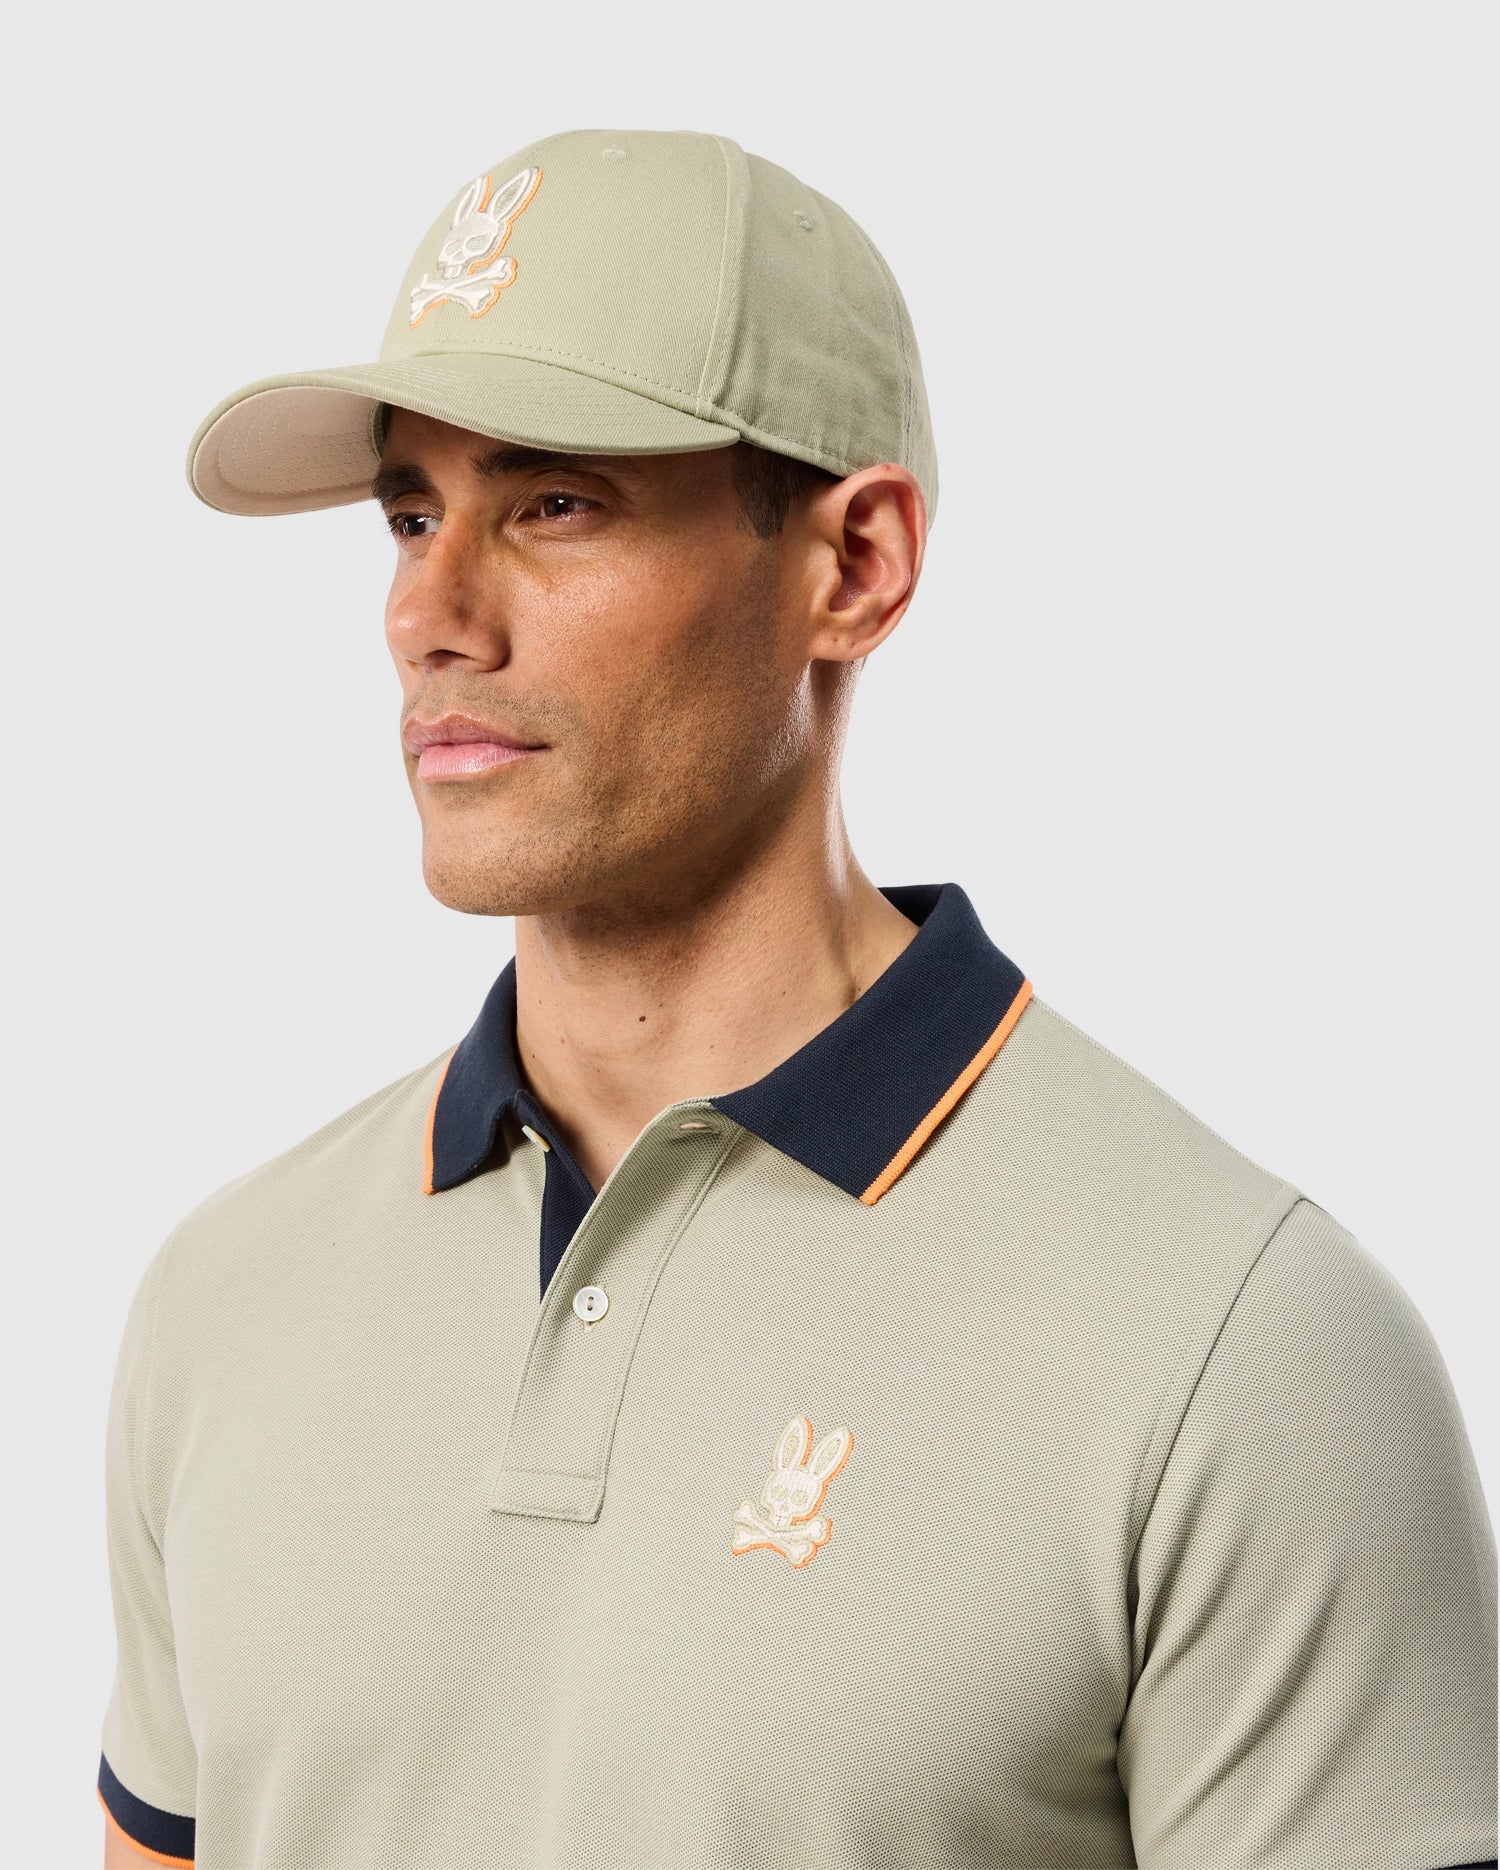 A man wearing a light green Psycho Bunny MENS KAYDEN BASEBALL CAP - B6A677C200 and a matching polo shirt with a bunny logo on both. He is facing slightly to the right, and the background is plain white. The shirt has a dark collar with an orange trim.